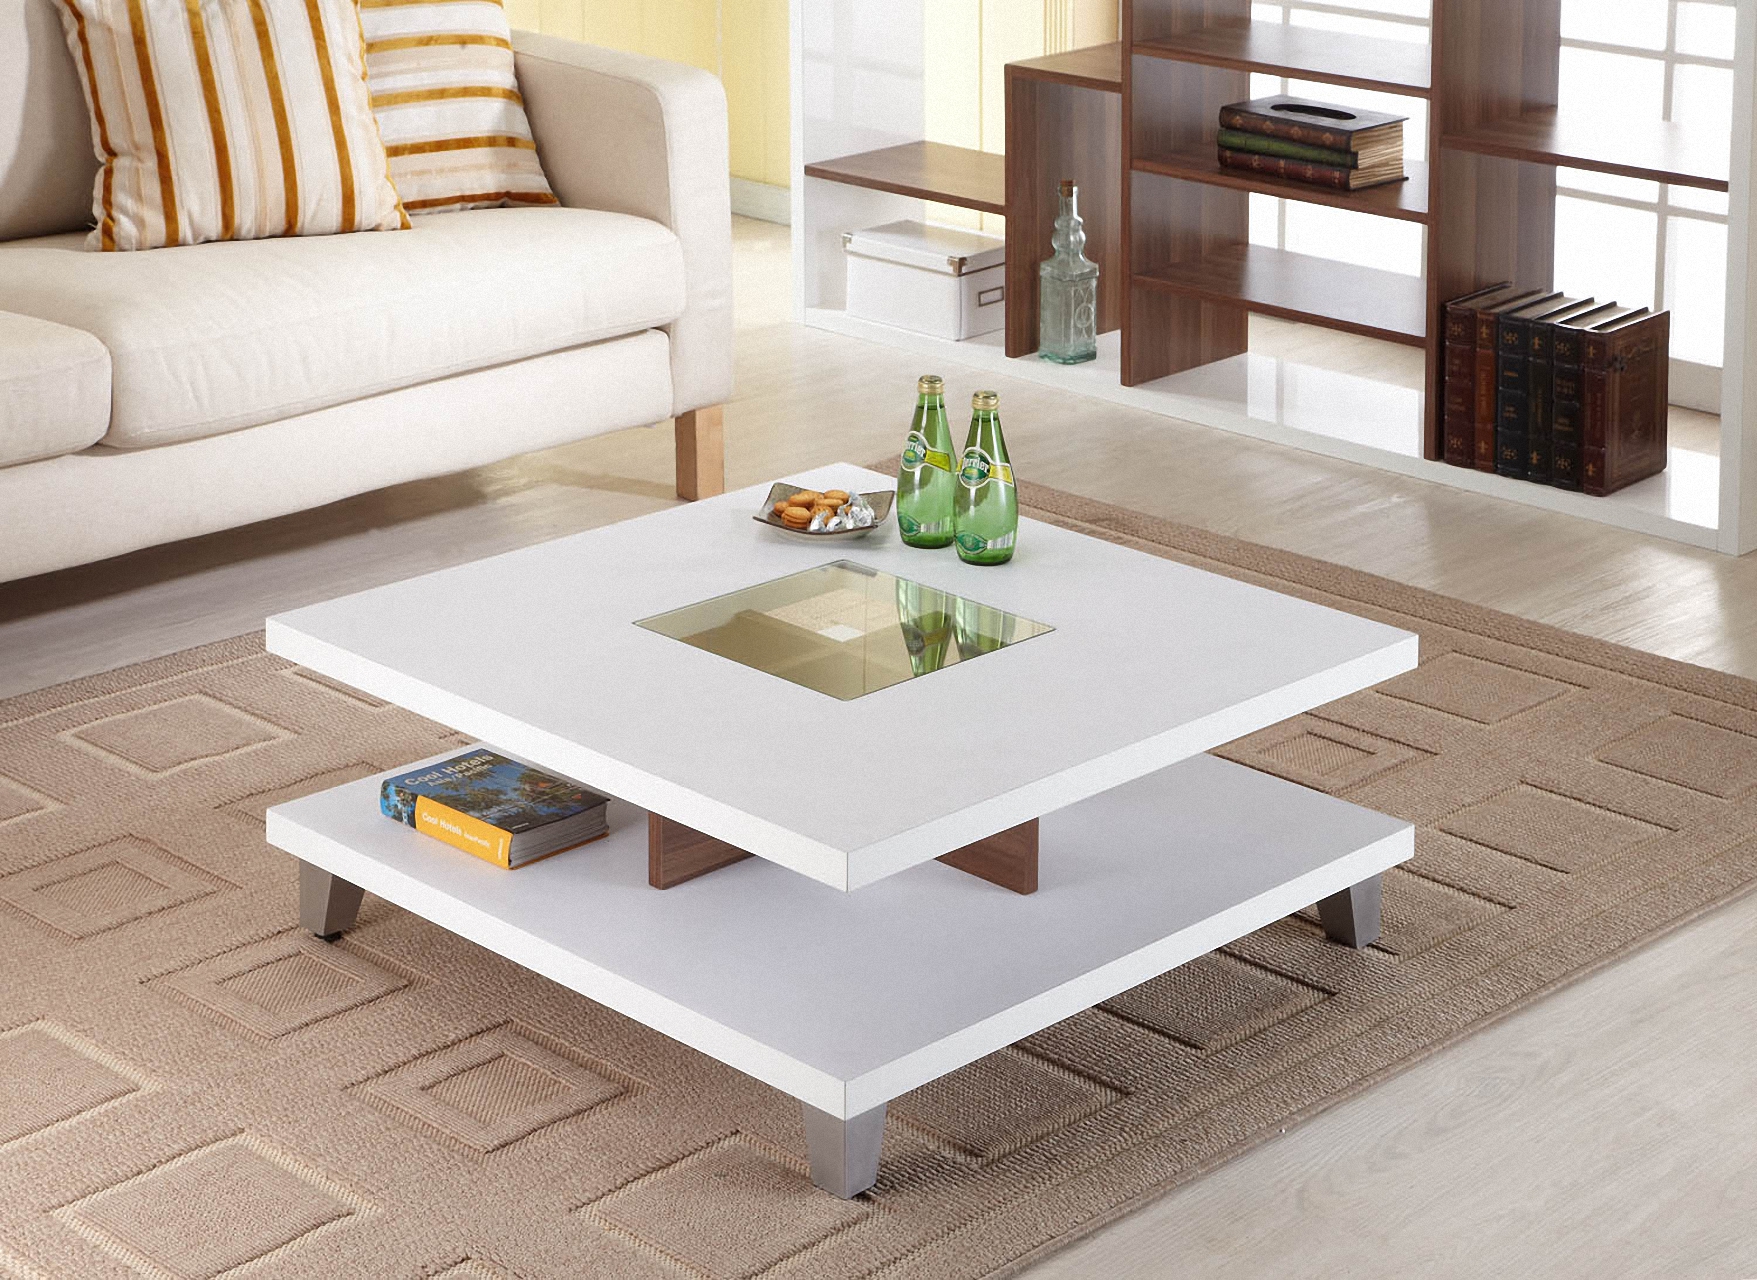 Furniture of America Trenca White and Walnut Coffee Table ...